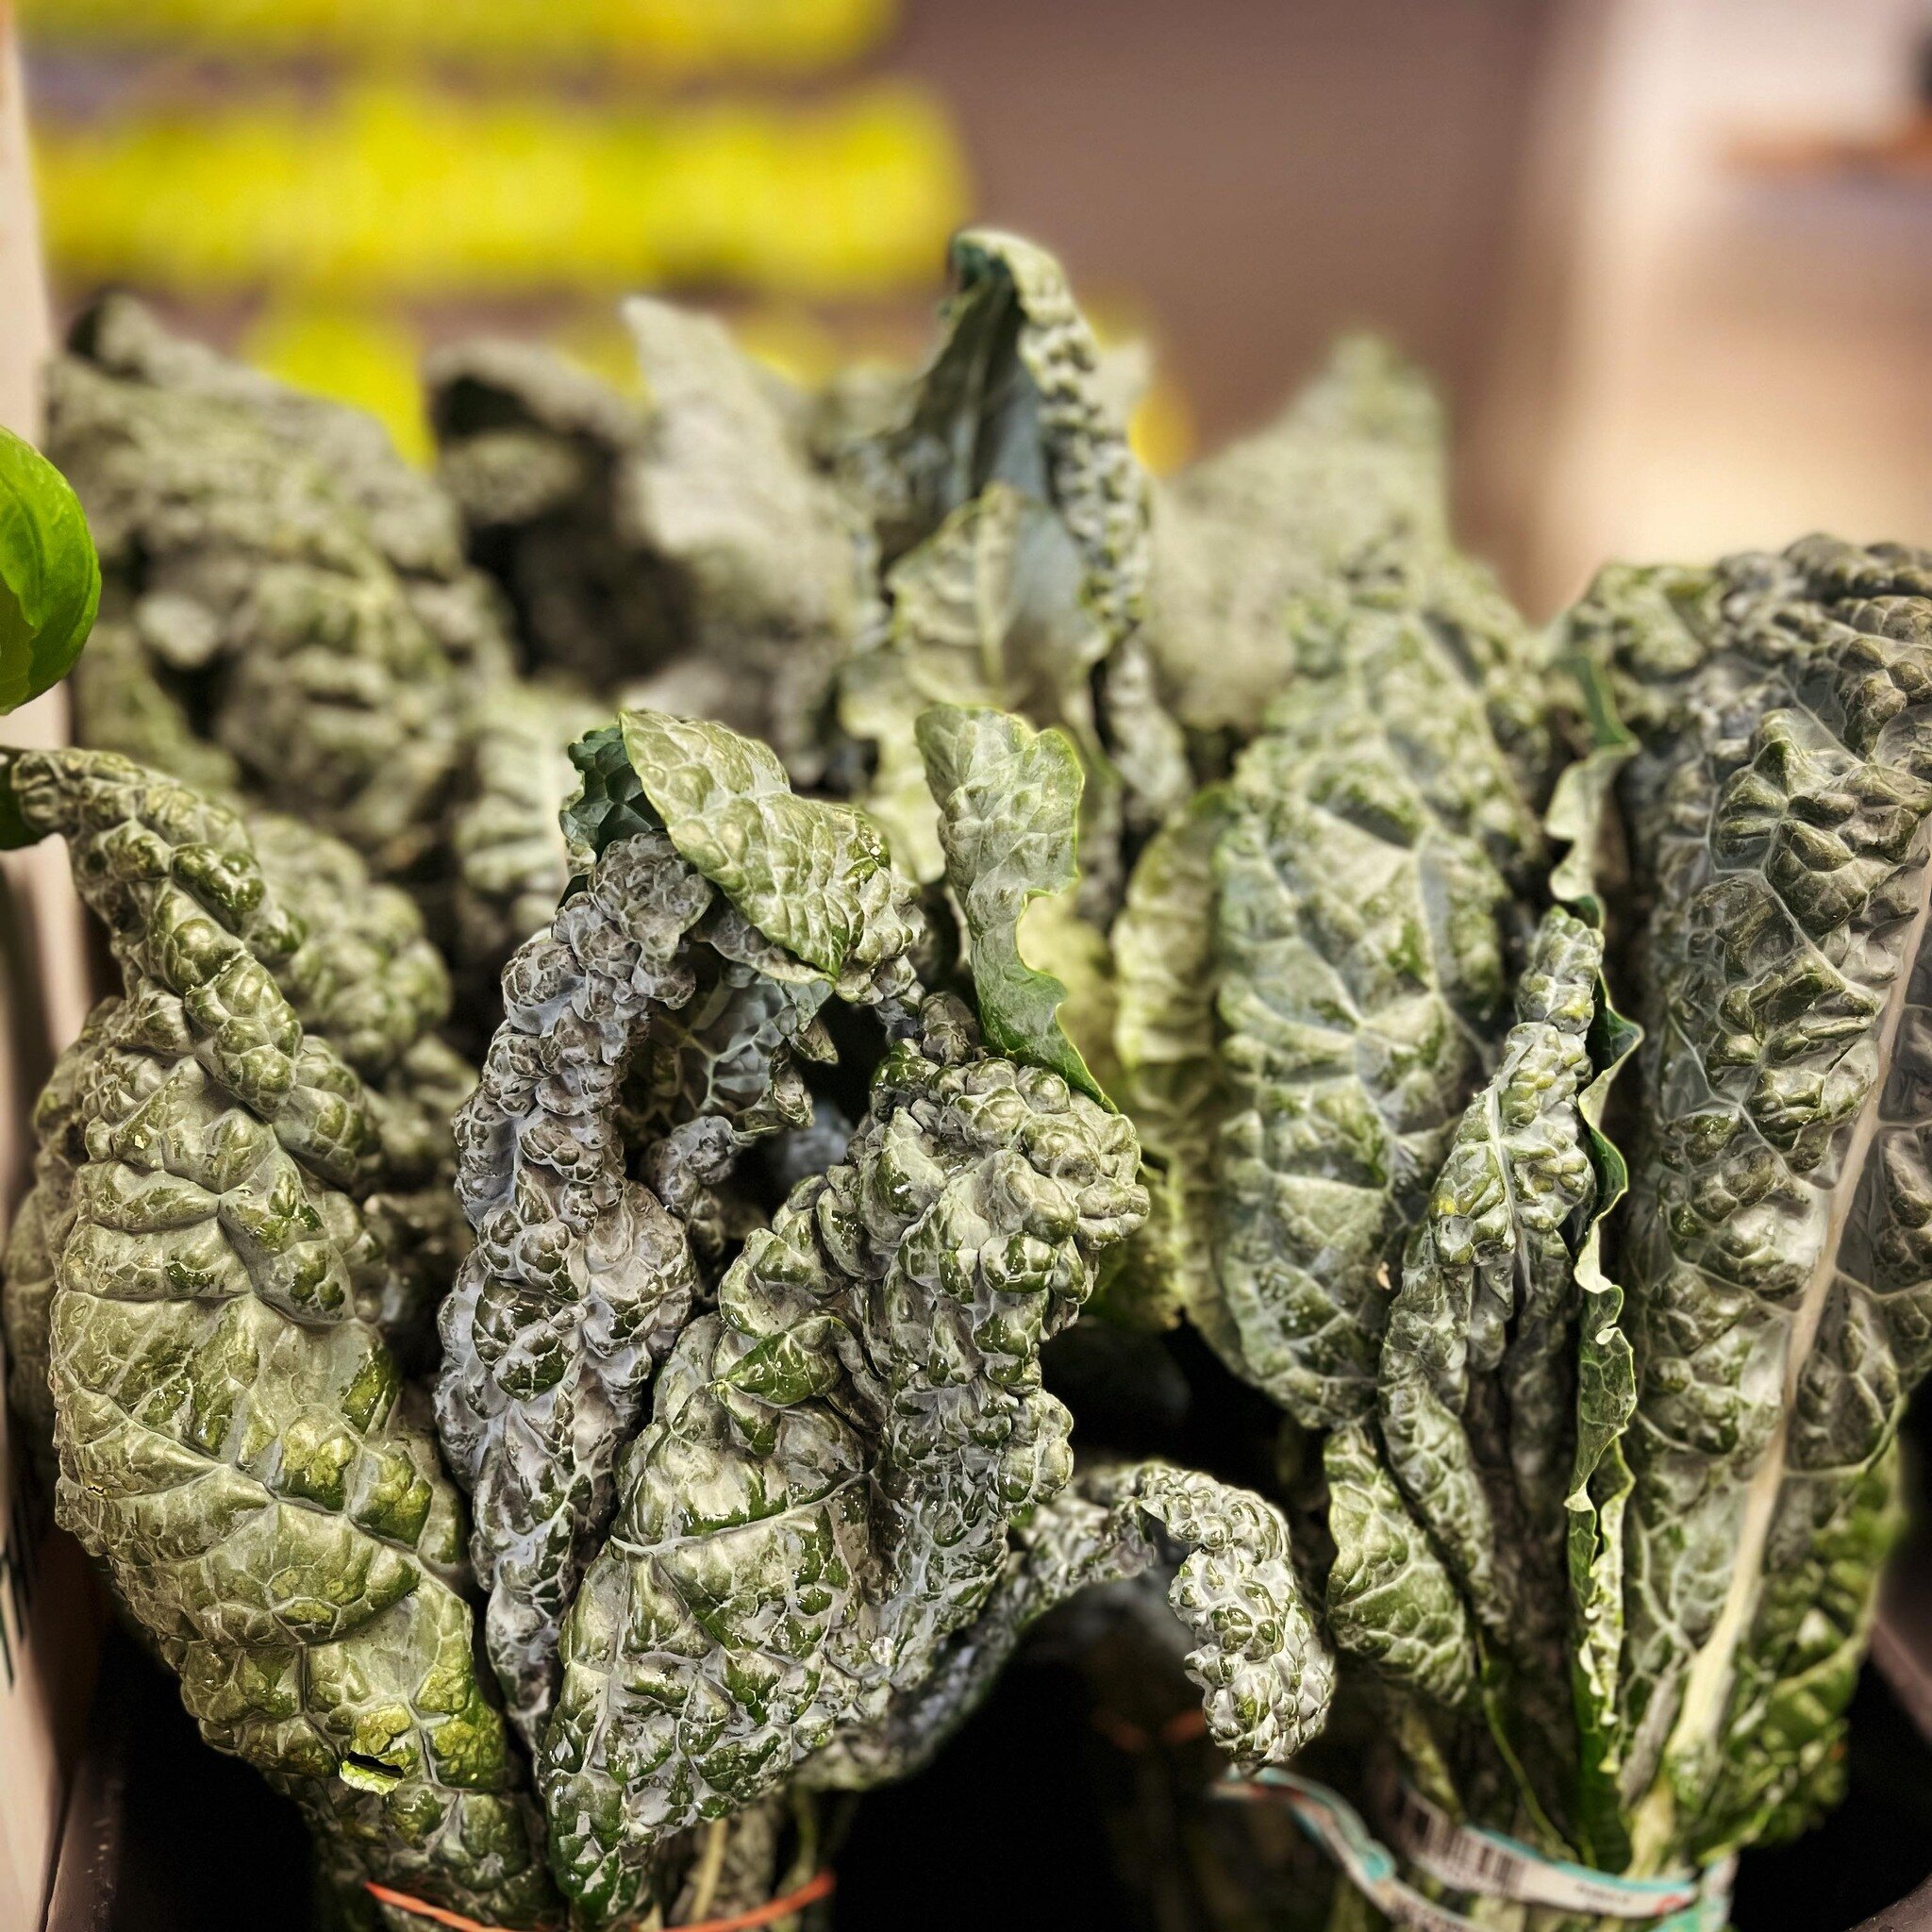 For those of you who asked&hellip;.Tuscan kale is in! #freshkale #tuscankale #theproduceplaceksq